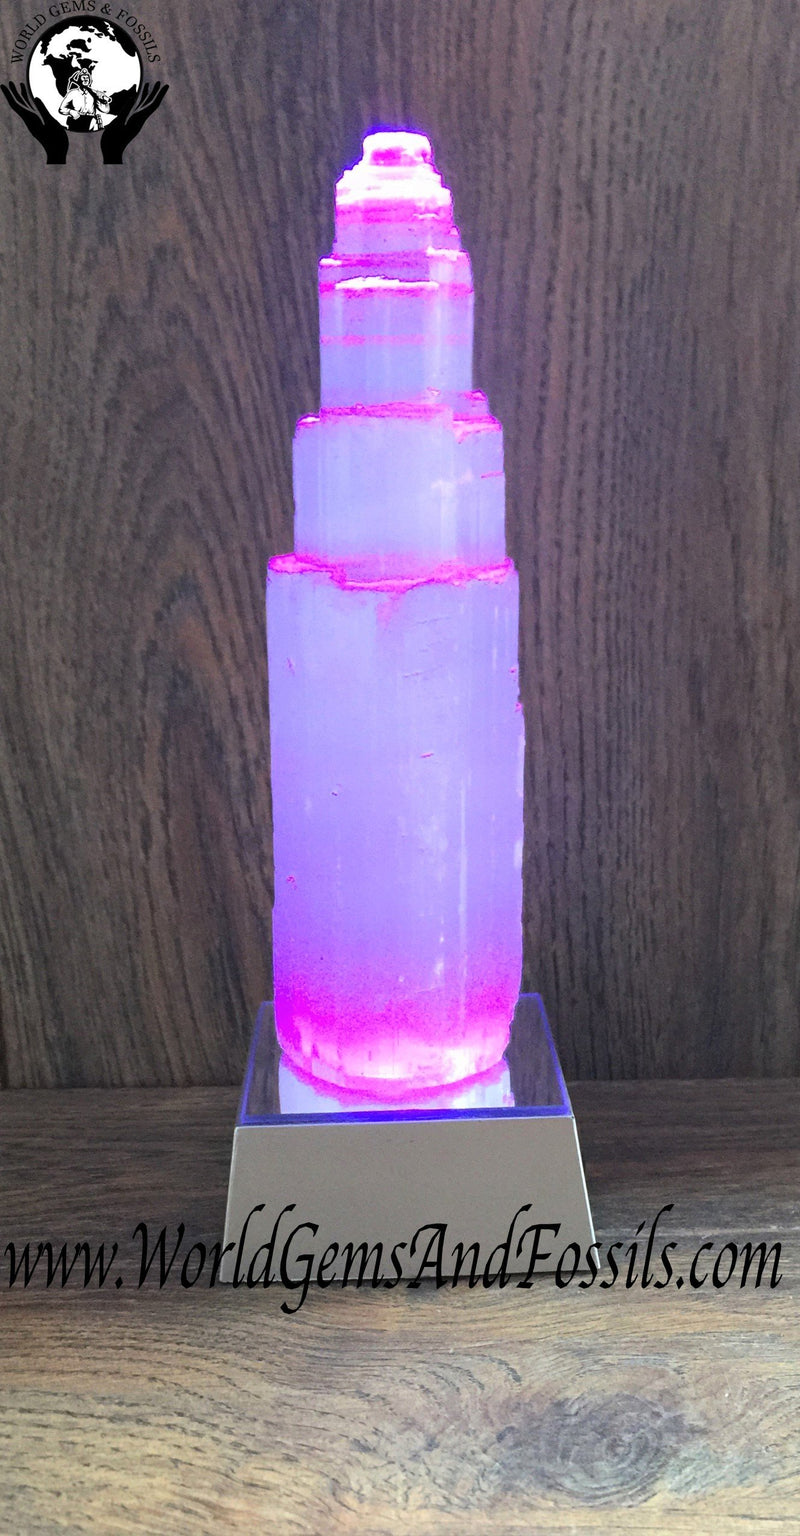 6" Selenite Tower With LED Base